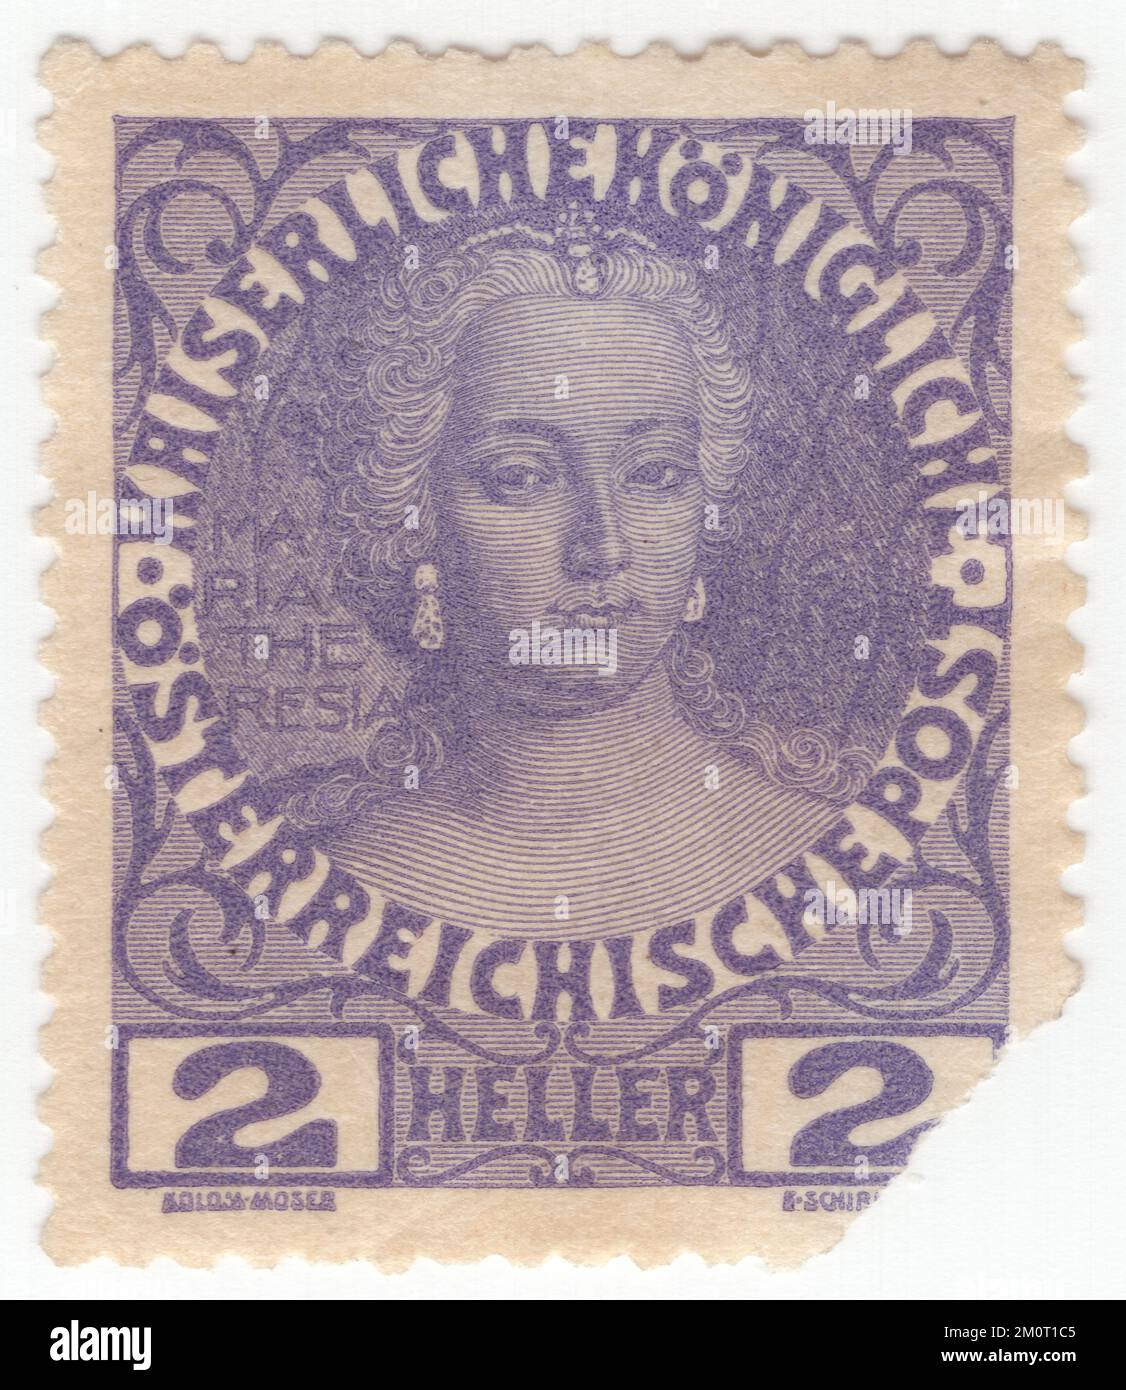 AUSTRIA — 1908: An 2 heller violet postage stamp depicting portrait of Maria Theresa. Definitive set issued for the 60th year of the reign of Austrian Monarch Franz Josef, Emperor of Austria, King of Hungary, and the other states of the Habsburg monarchy. Maria Theresa Walburga Amalia Christina was ruler of the Habsburg dominions from 1740 until her death in 1780, and the only woman to hold the position suo jure (in her own right). She was the sovereign of Austria, Hungary, Croatia, Bohemia, Transylvania, Mantua, Milan, Lodomeria and Galicia, the Austrian Netherlands, and Parma Stock Photo